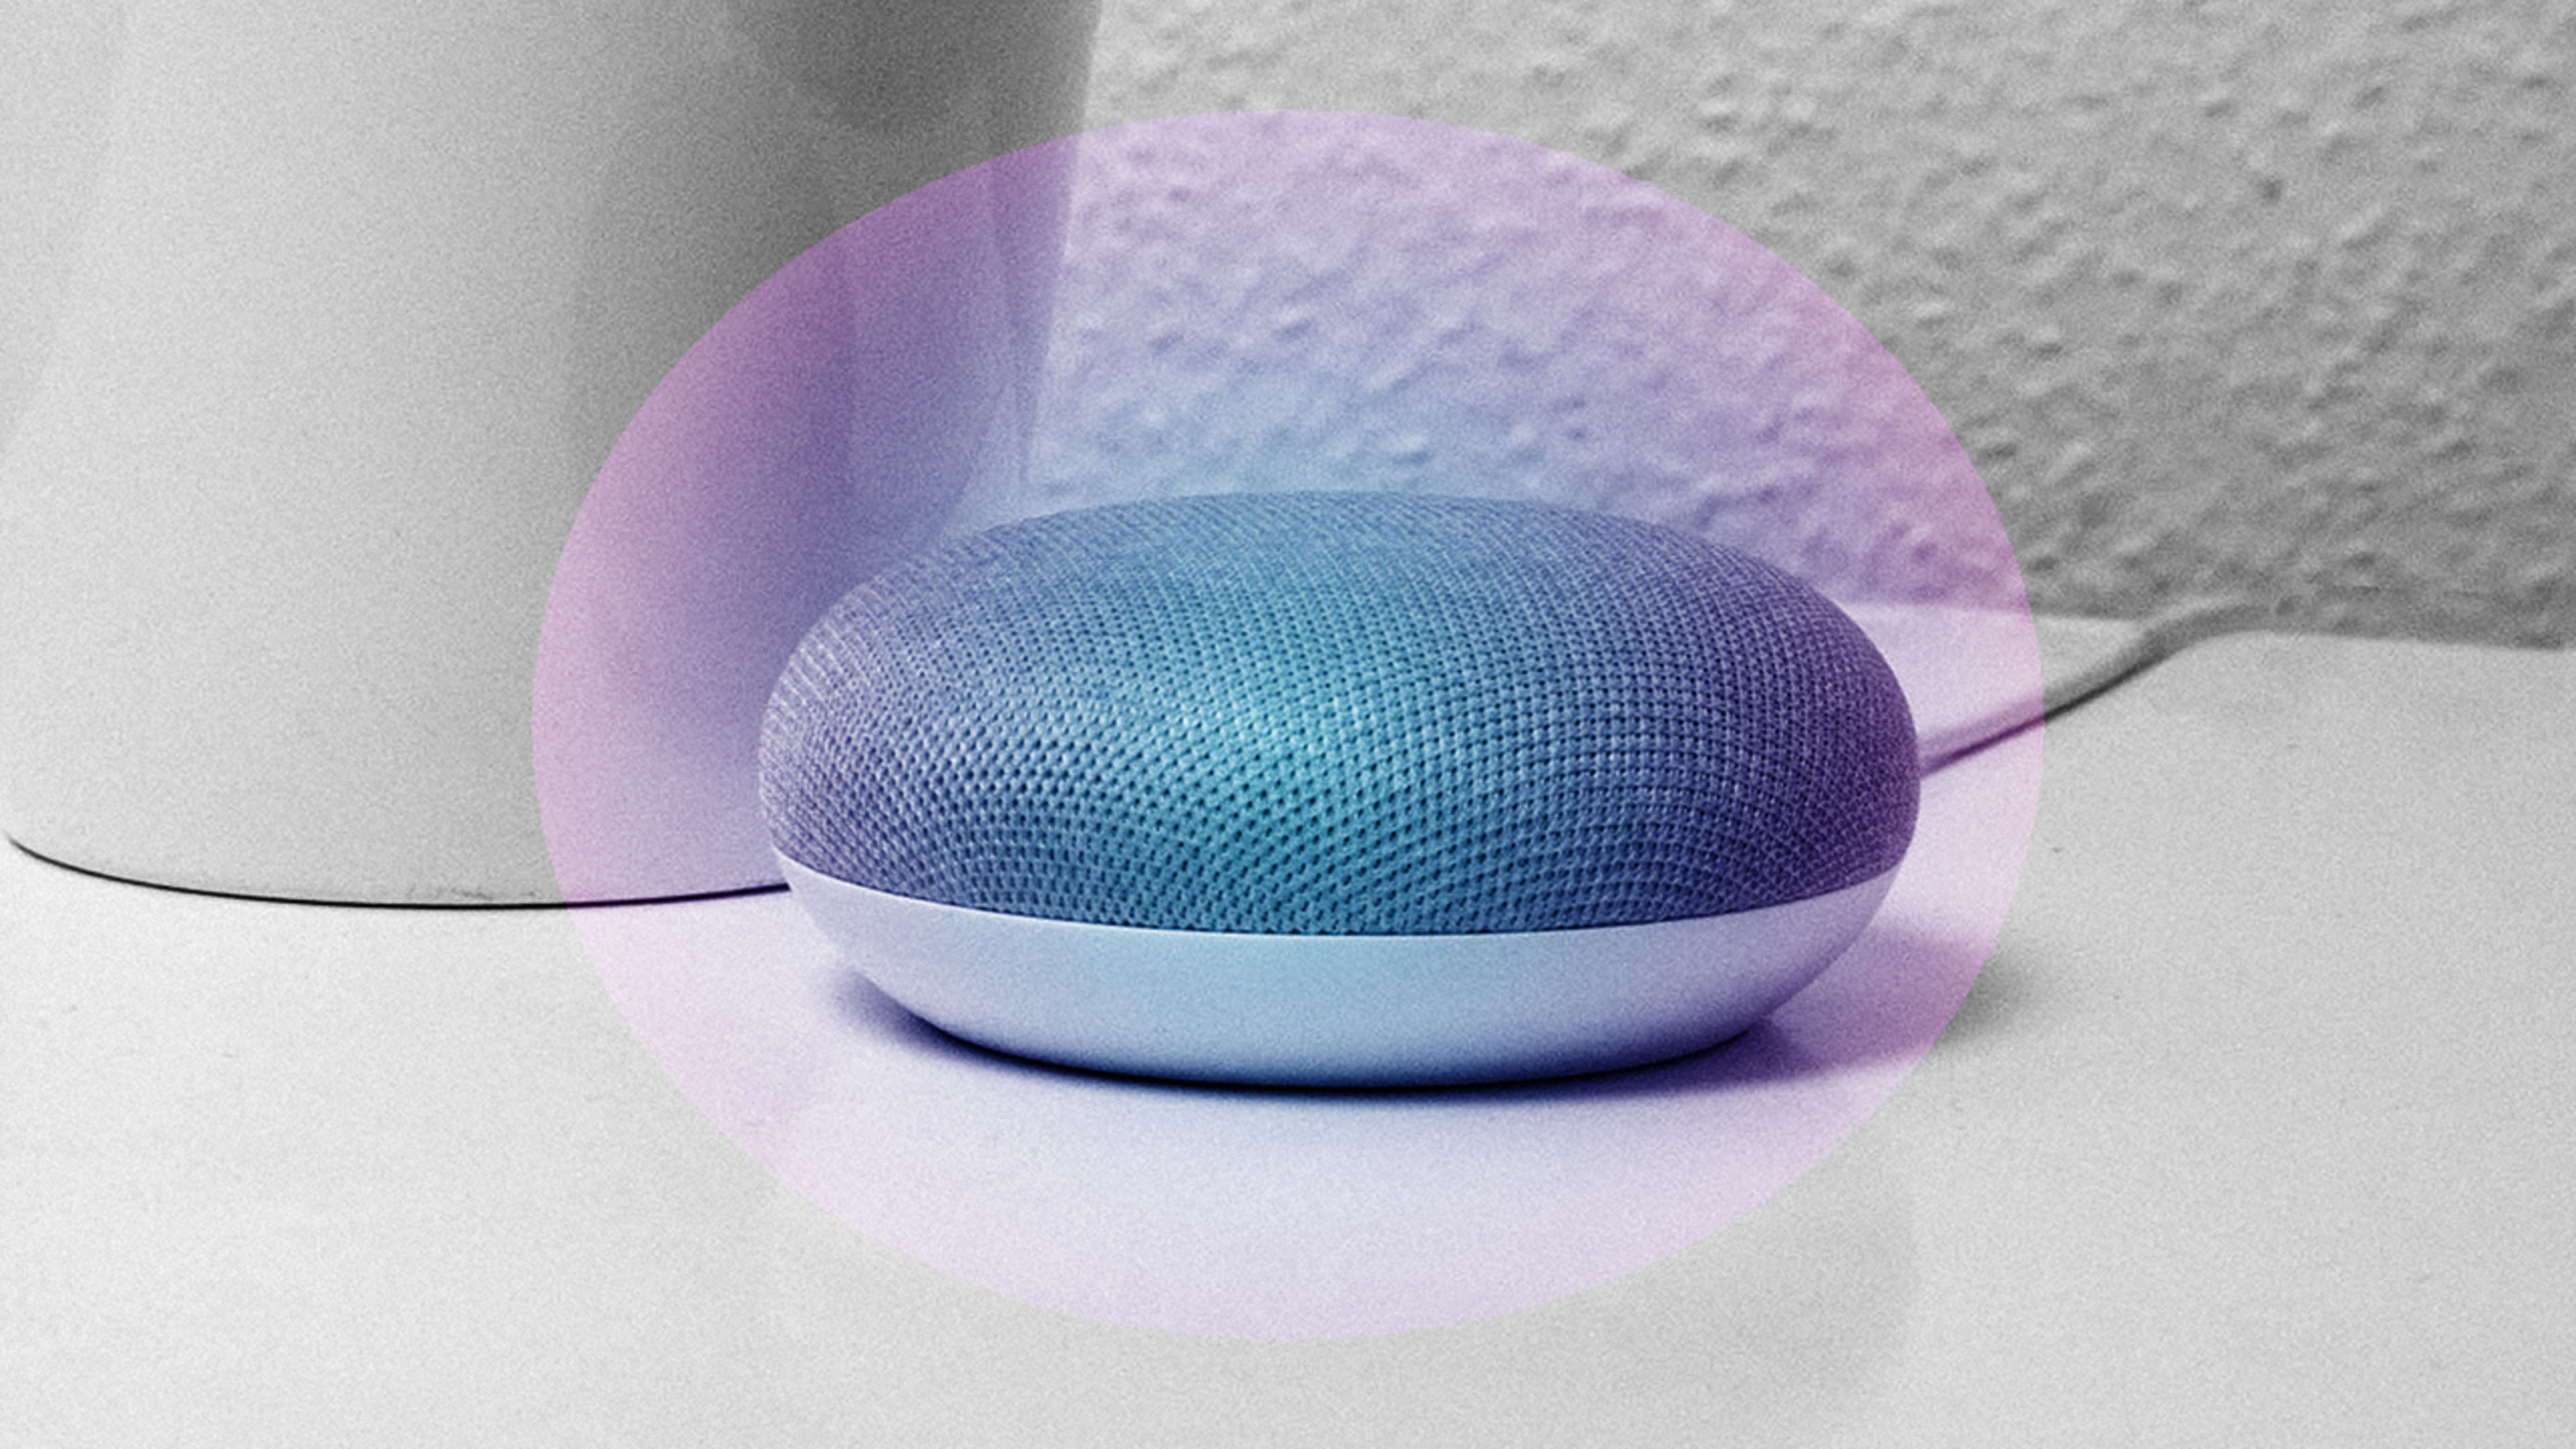 When you talk to Google Assistant, a human might get to listen